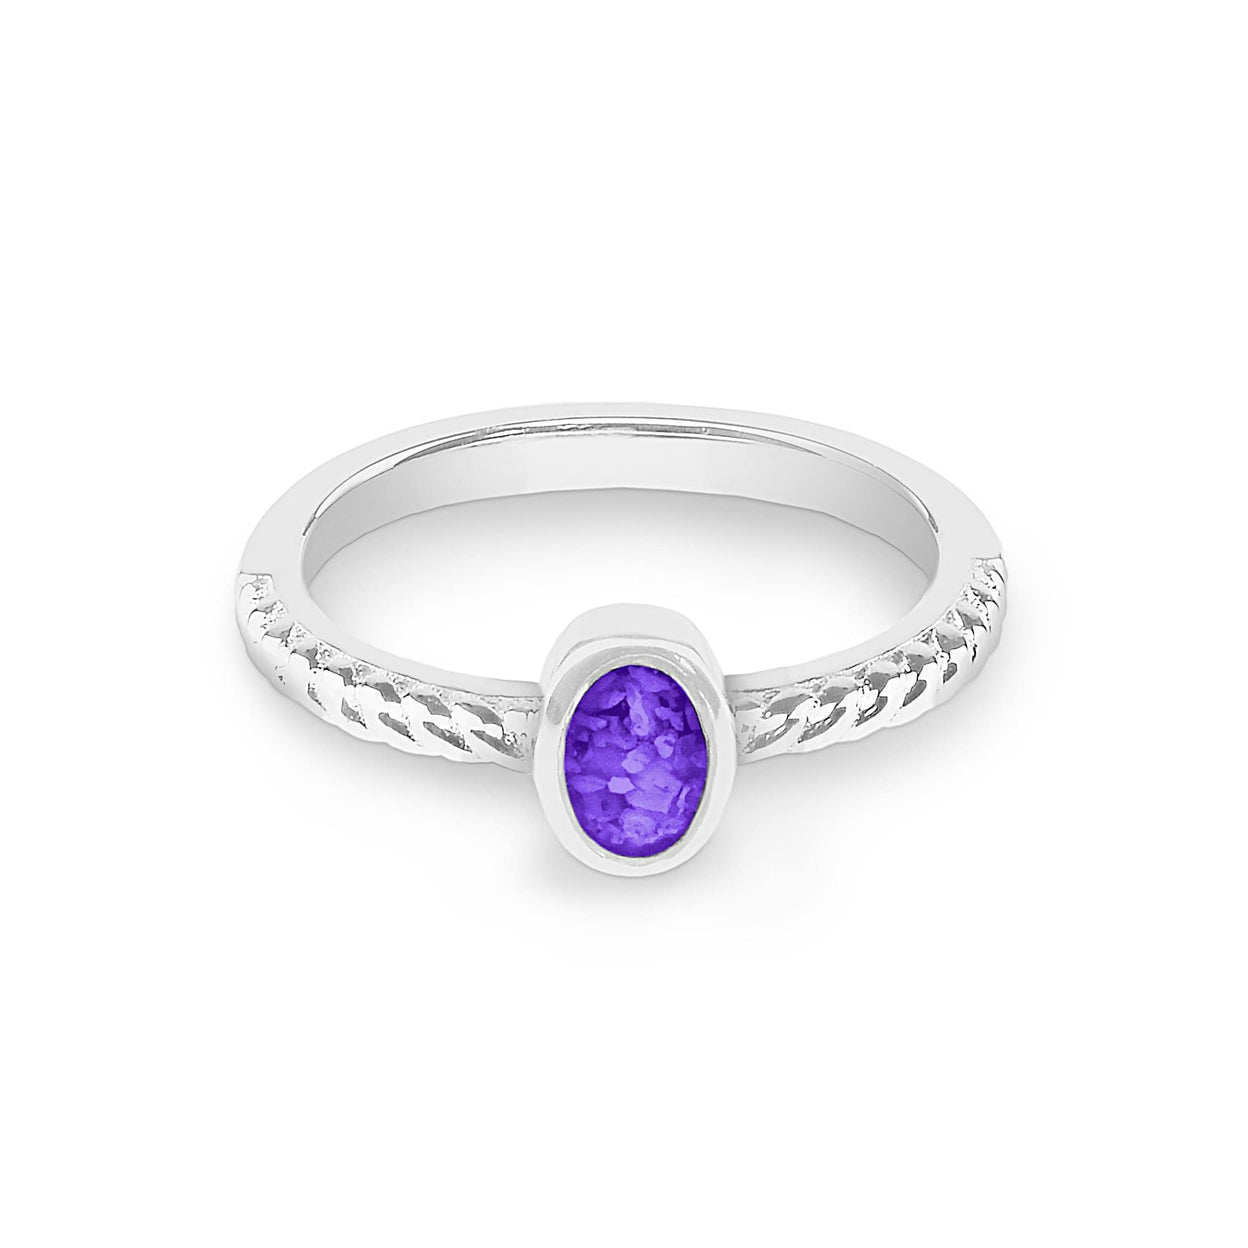 Load image into Gallery viewer, EverWith Ladies Petite Guard Memorial Ashes Ring